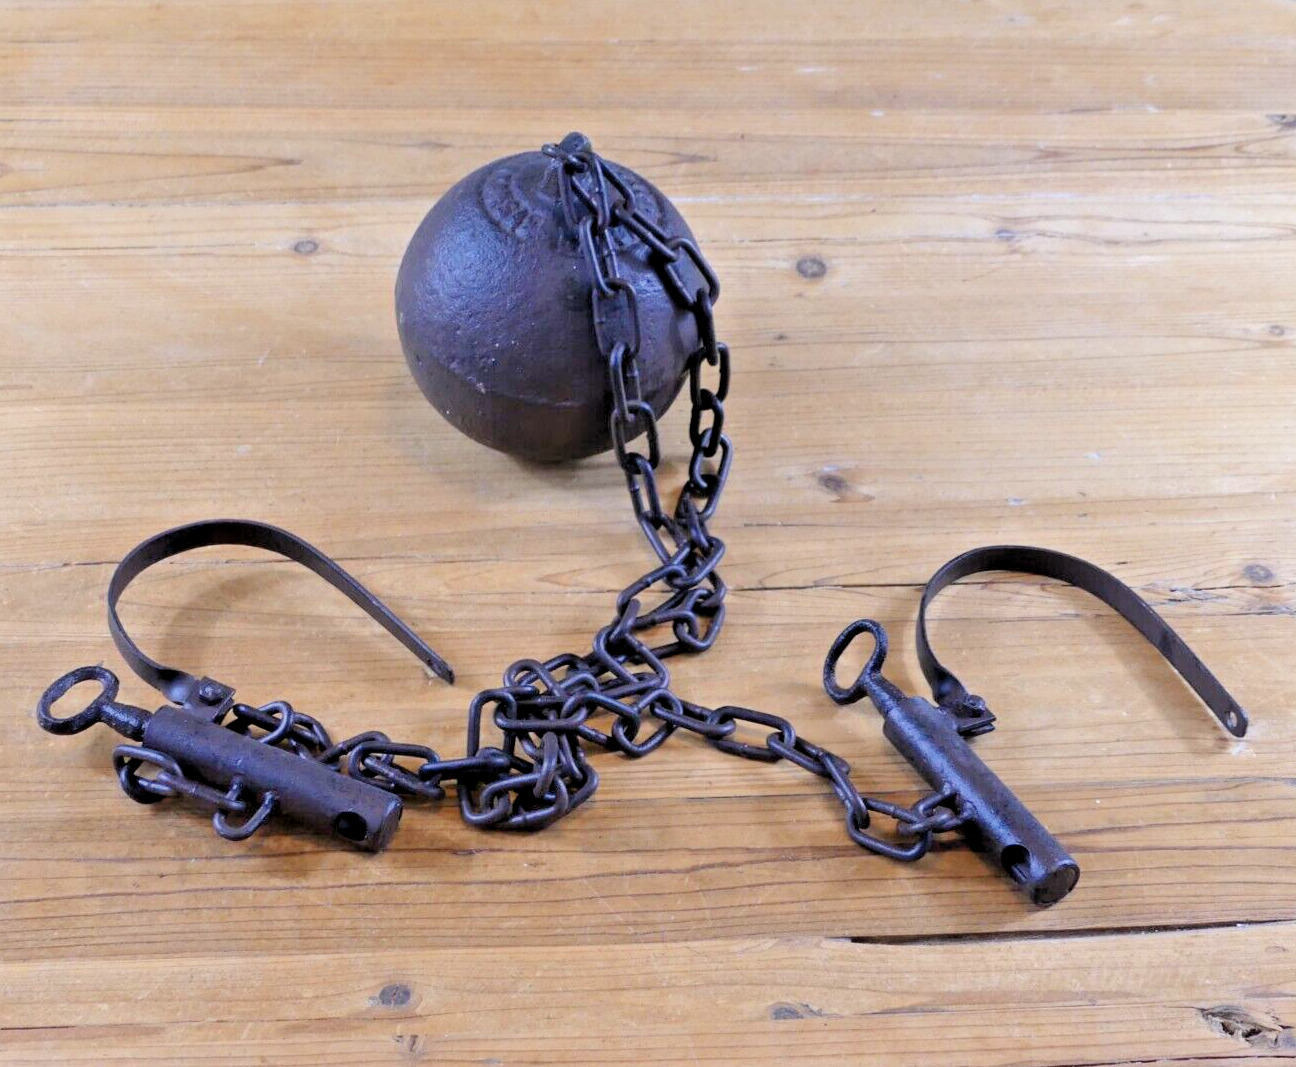 Ball and Chain Prison Iron Rustic Jail Prop 17 lbs Shackles Leavenworth Kansas